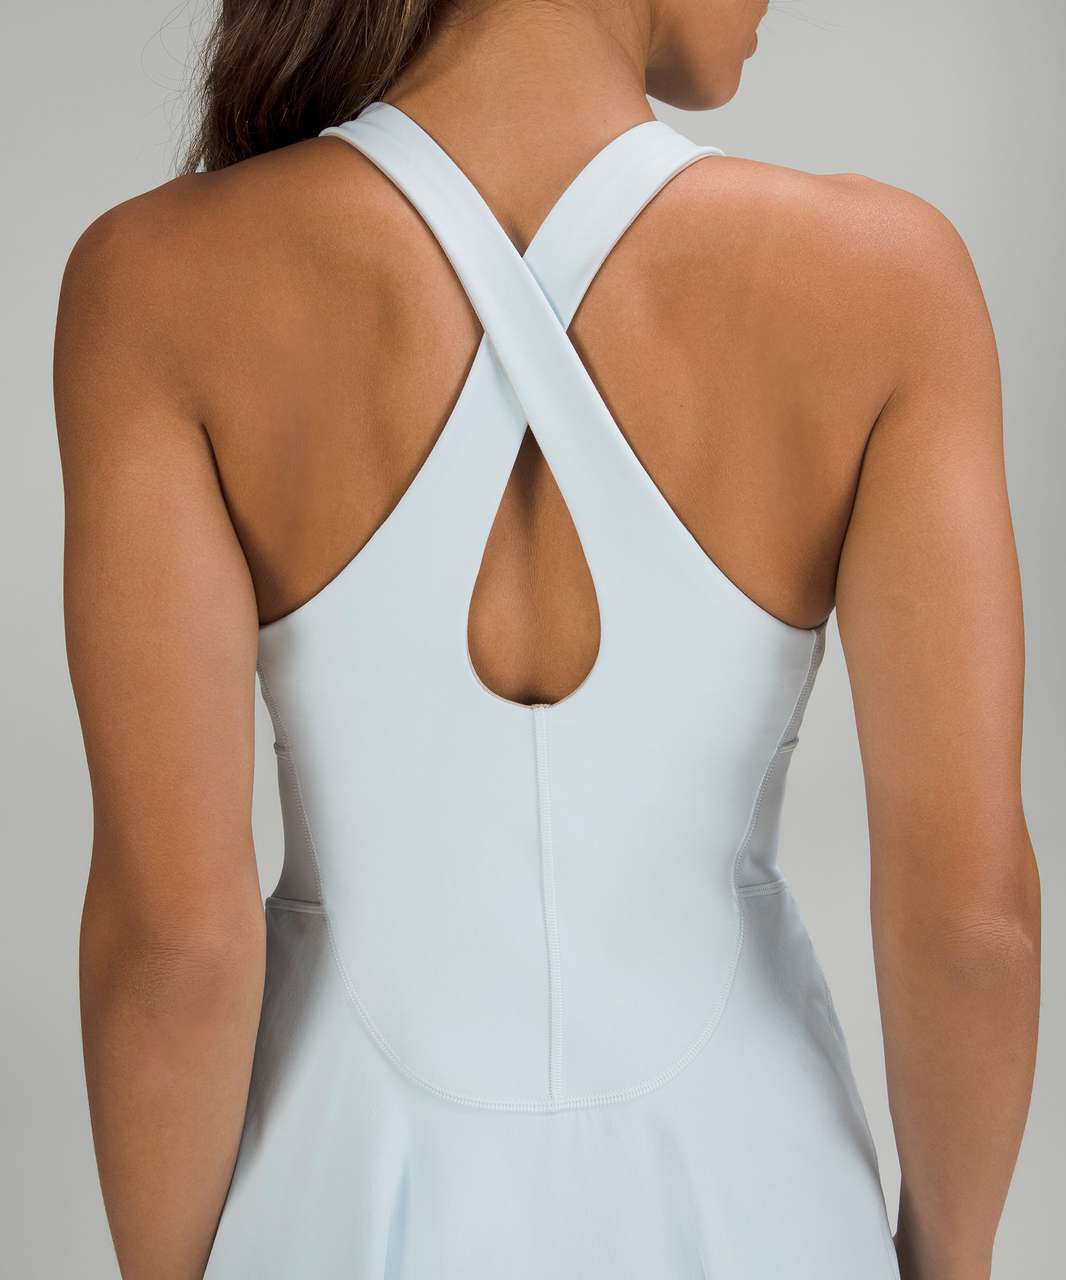 Ivivva by Lululemon white Give It Your All exercise tennis dress 10 NWT